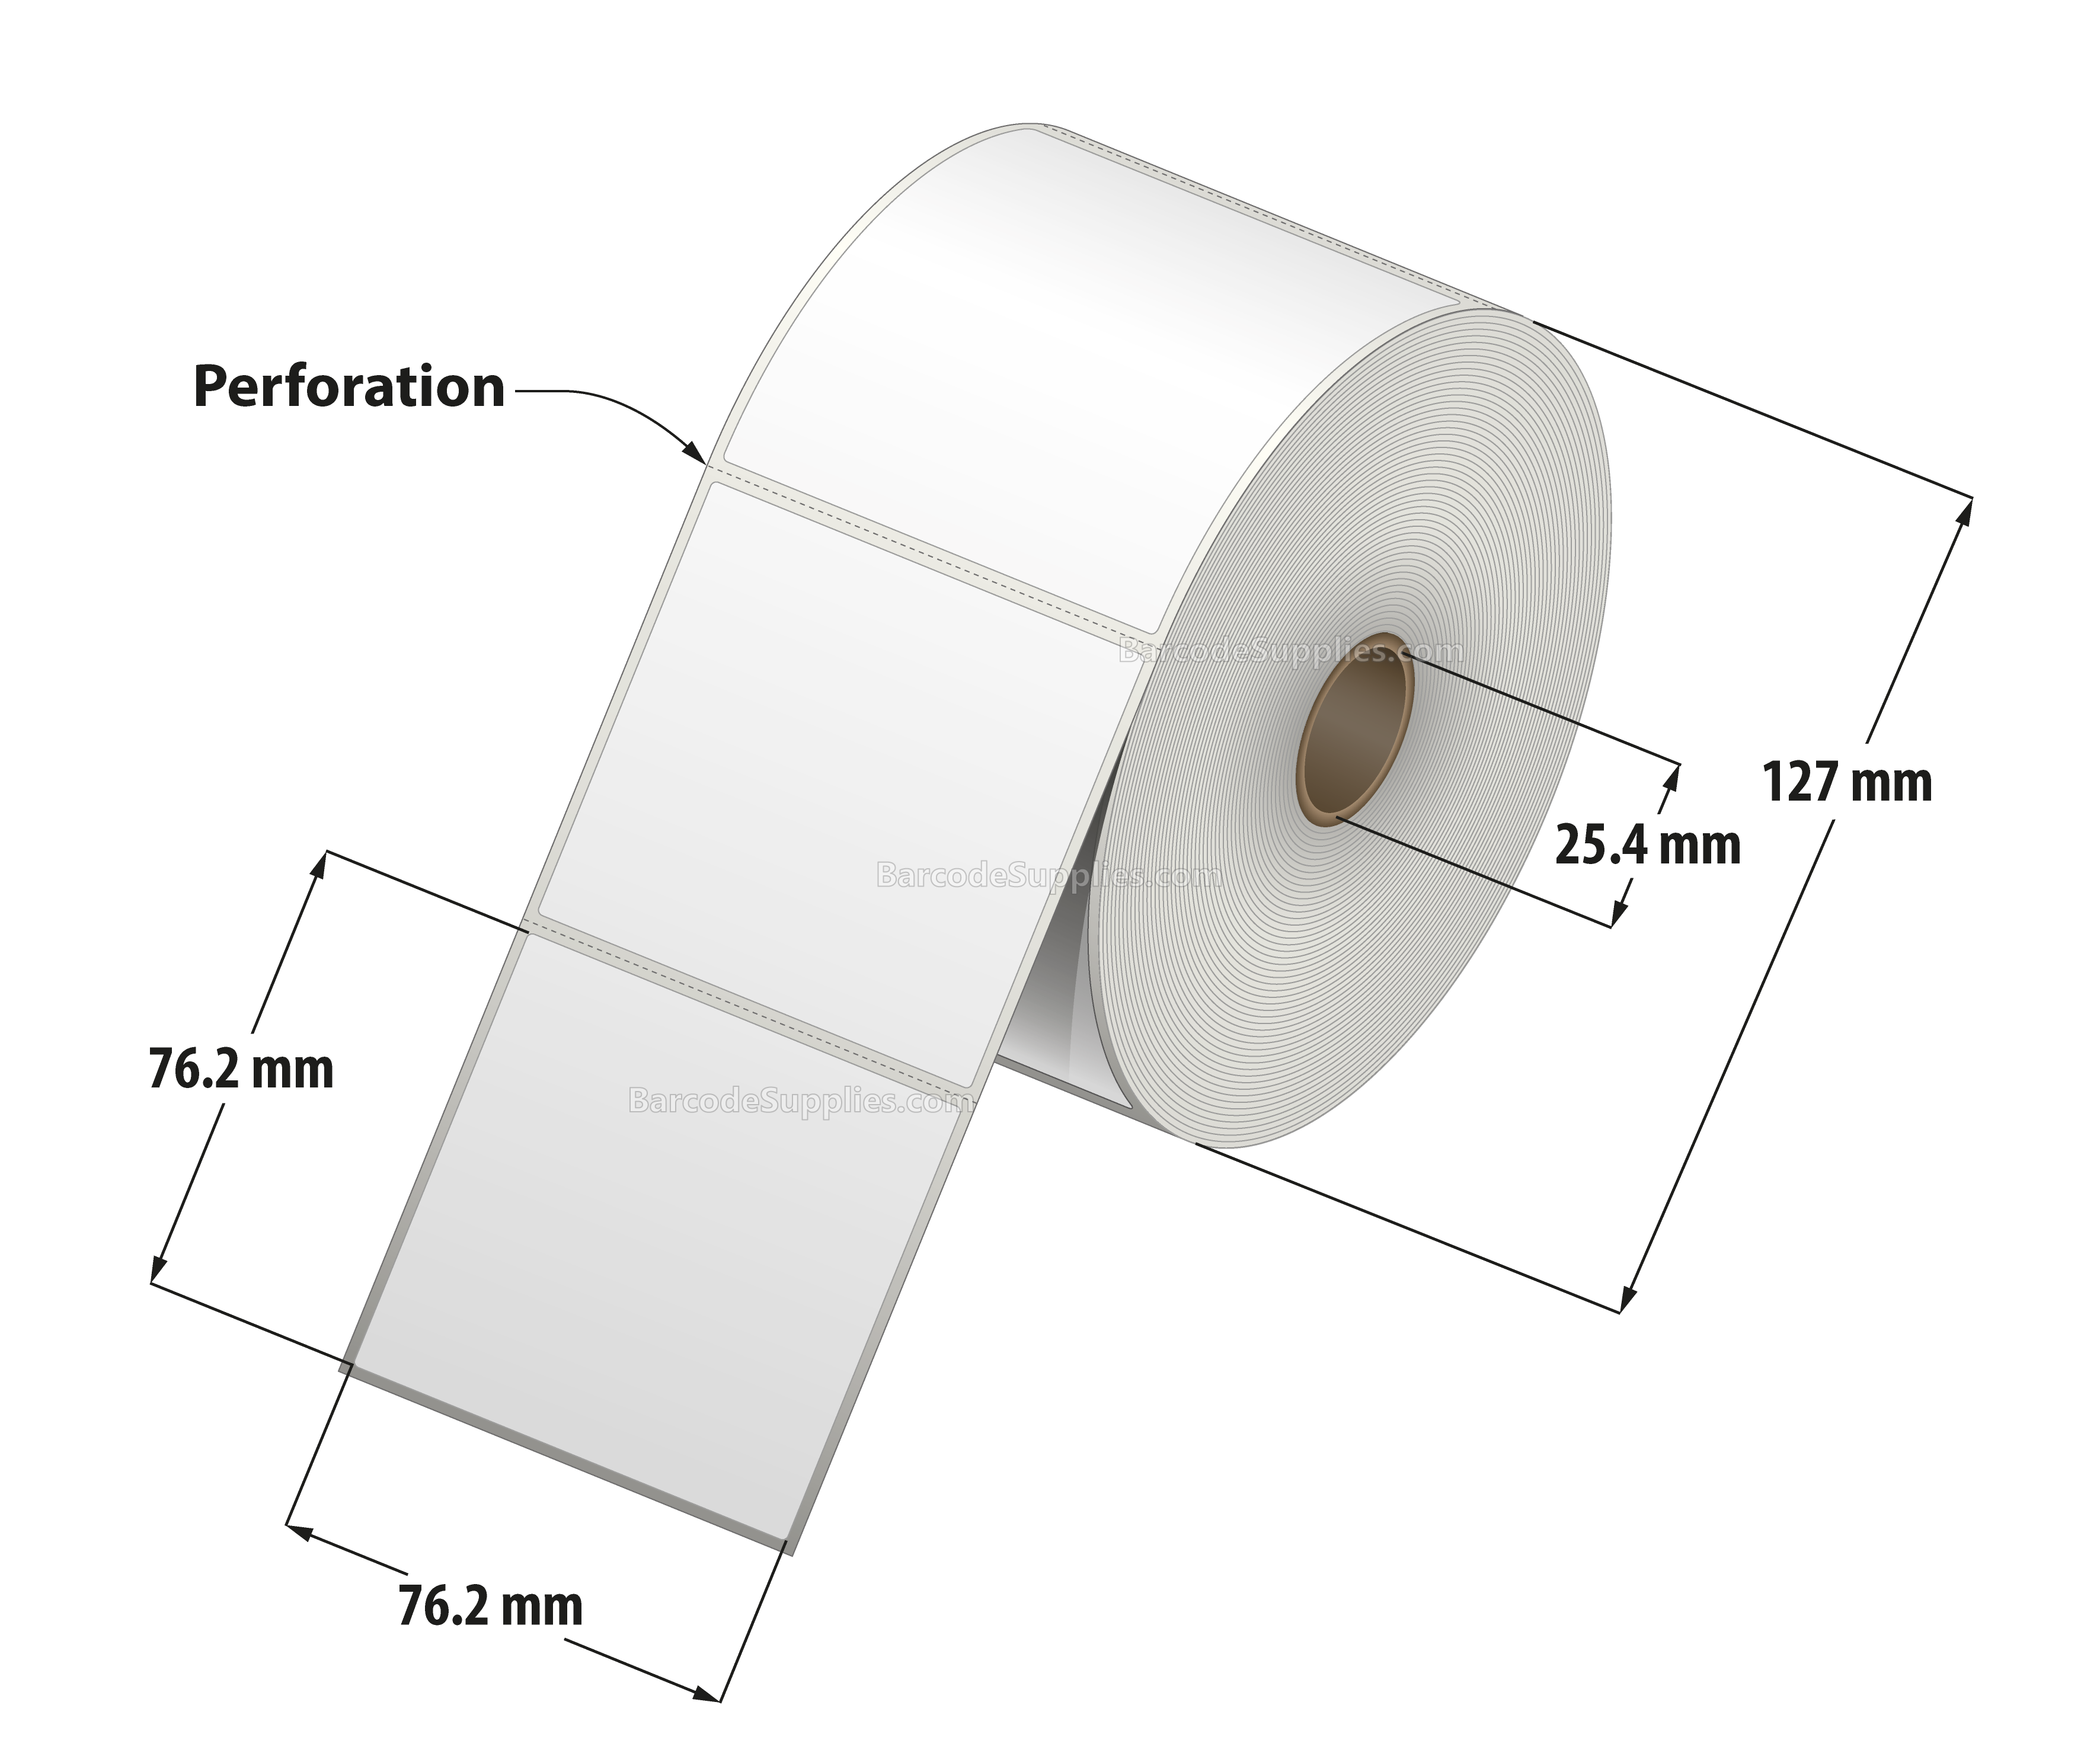 3 x 3 Thermal Transfer White Labels With Permanent Adhesive - Perforated - 890 Labels Per Roll - Carton Of 12 Rolls - 10680 Labels Total - MPN: RT-3-3-890-1 - BarcodeSource, Inc.